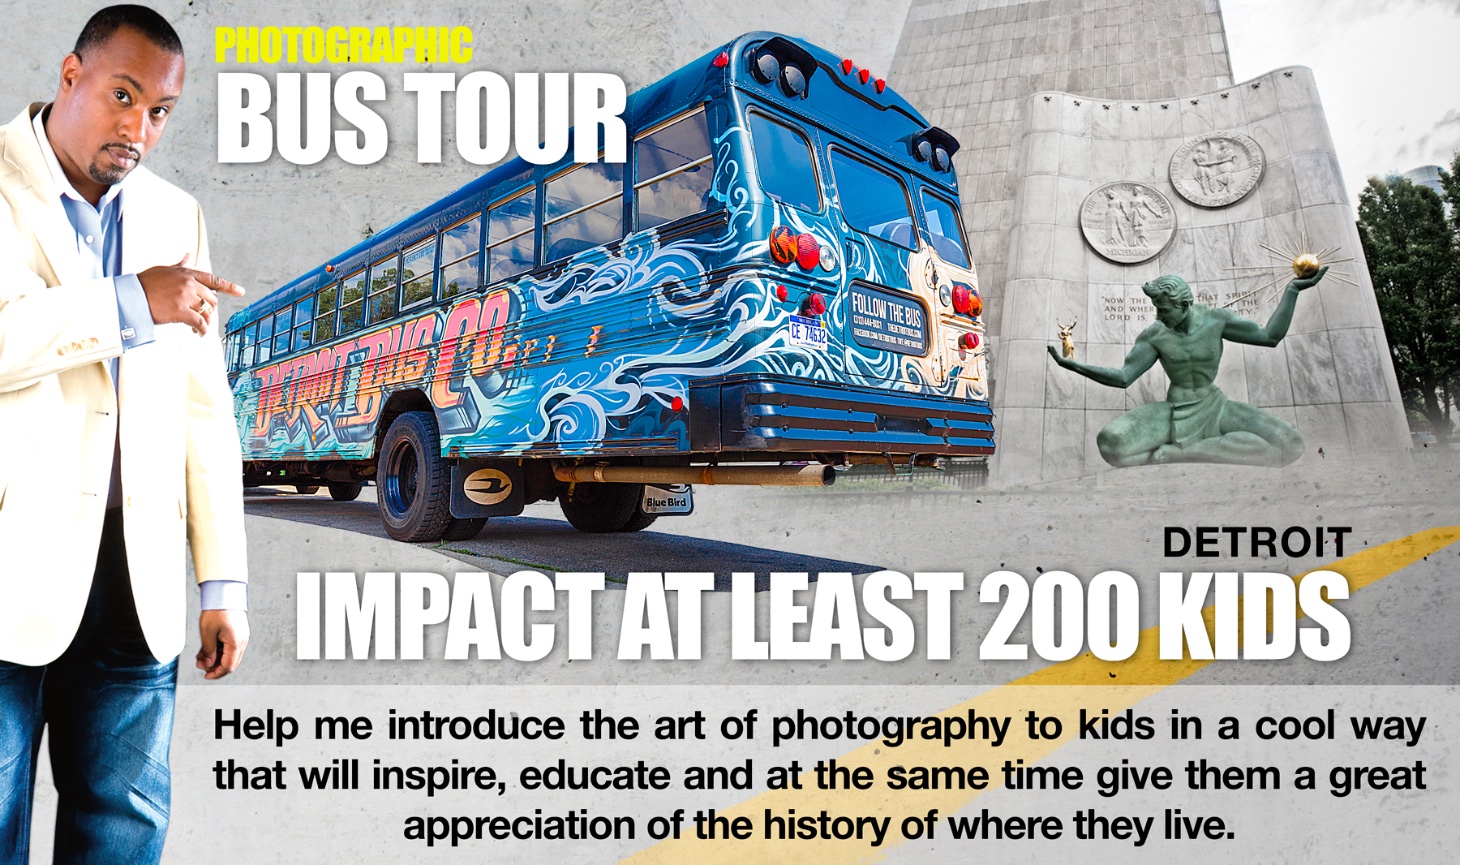 IMPACTING DETROIT YOUTH Through Innovative Tour: Giving Campaign